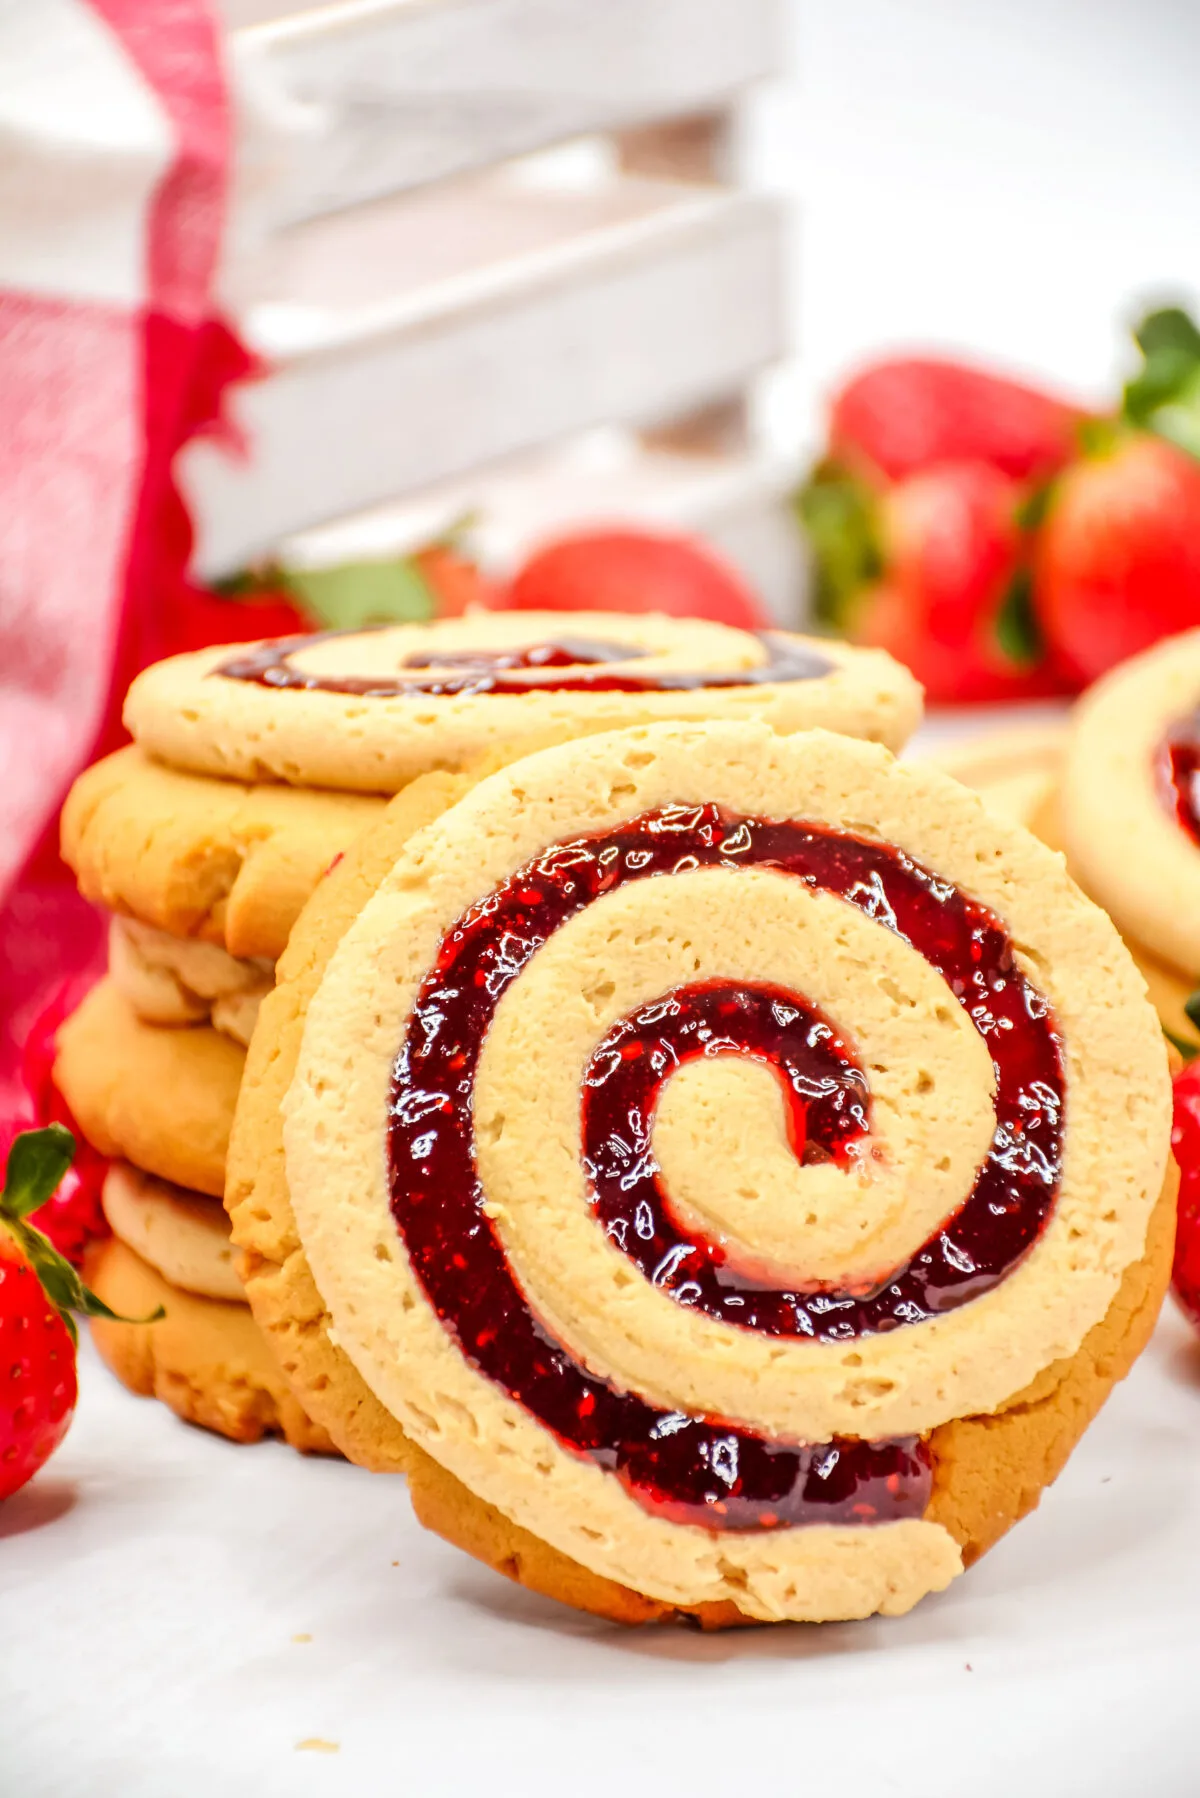 Love the classic PB&J combo? Make our easy Crumbl peanut butter and jelly cookies copycat recipe for tasty and tender peanut butter cookies!